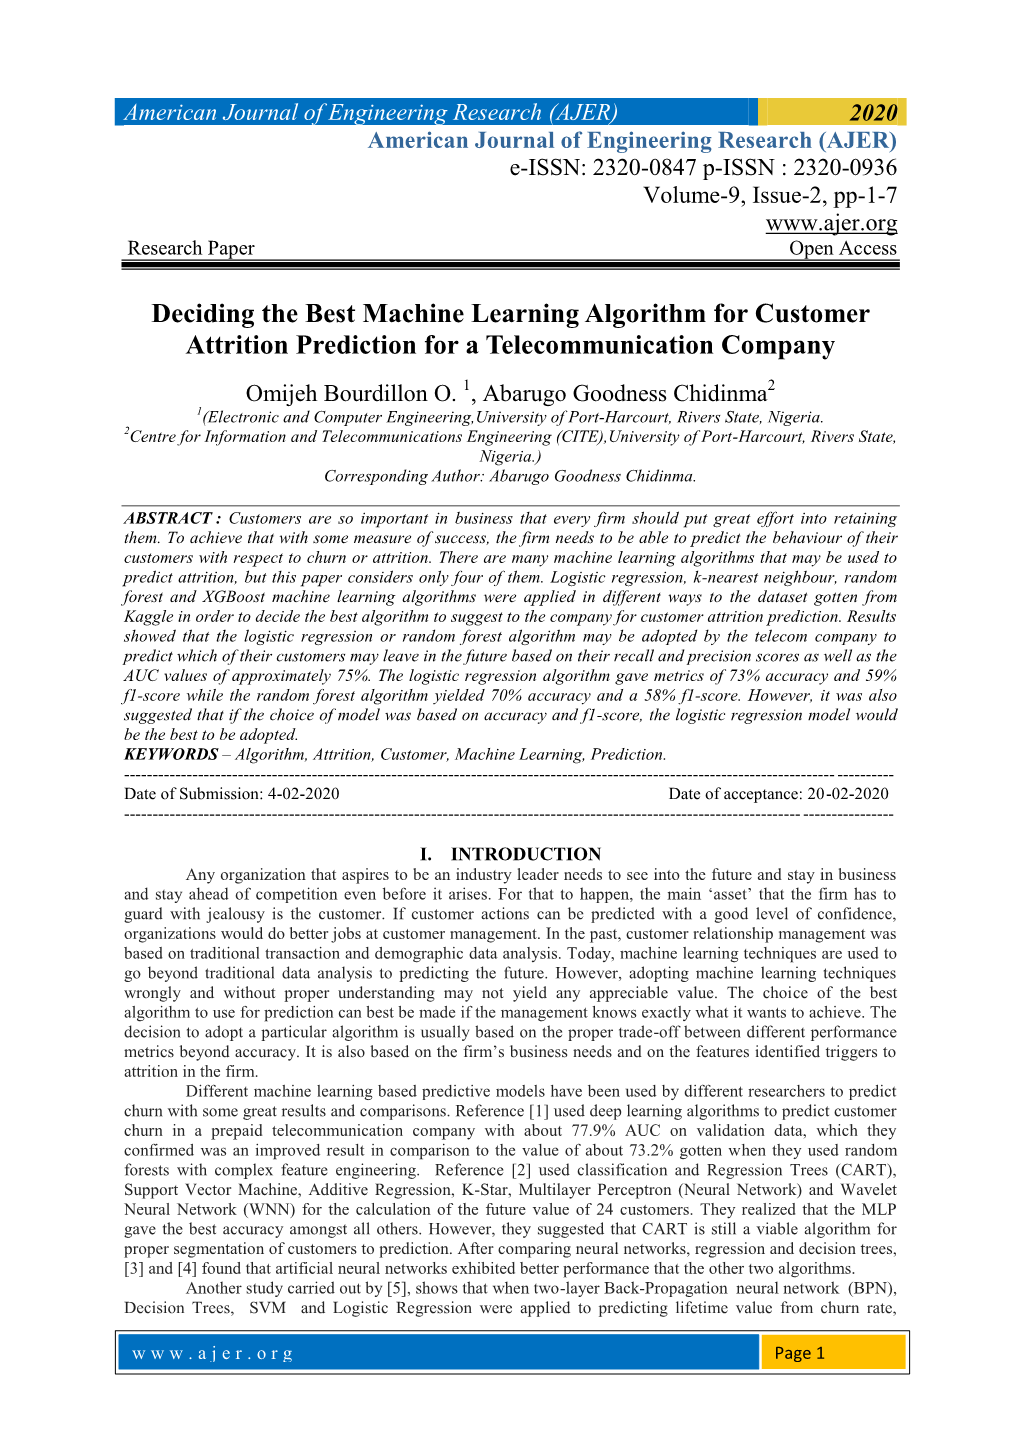 Deciding the Best Machine Learning Algorithm for Customer Attrition Prediction for a Telecommunication Company